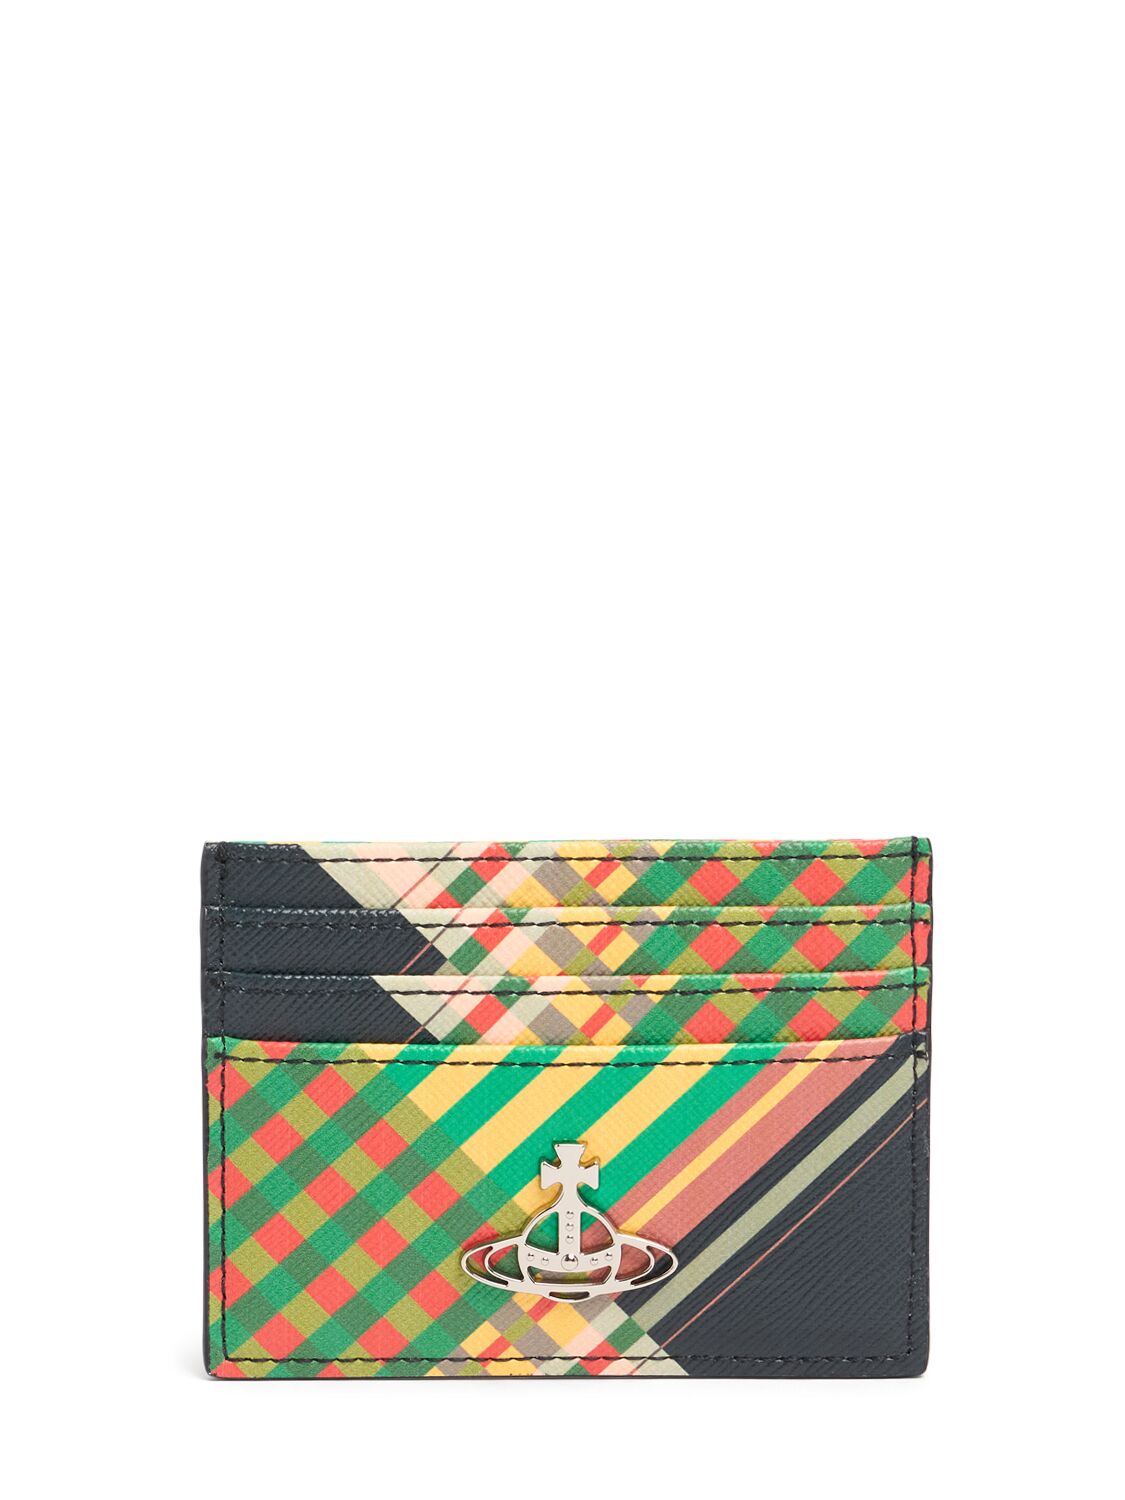 Image of Saffiano Printed Card Holder